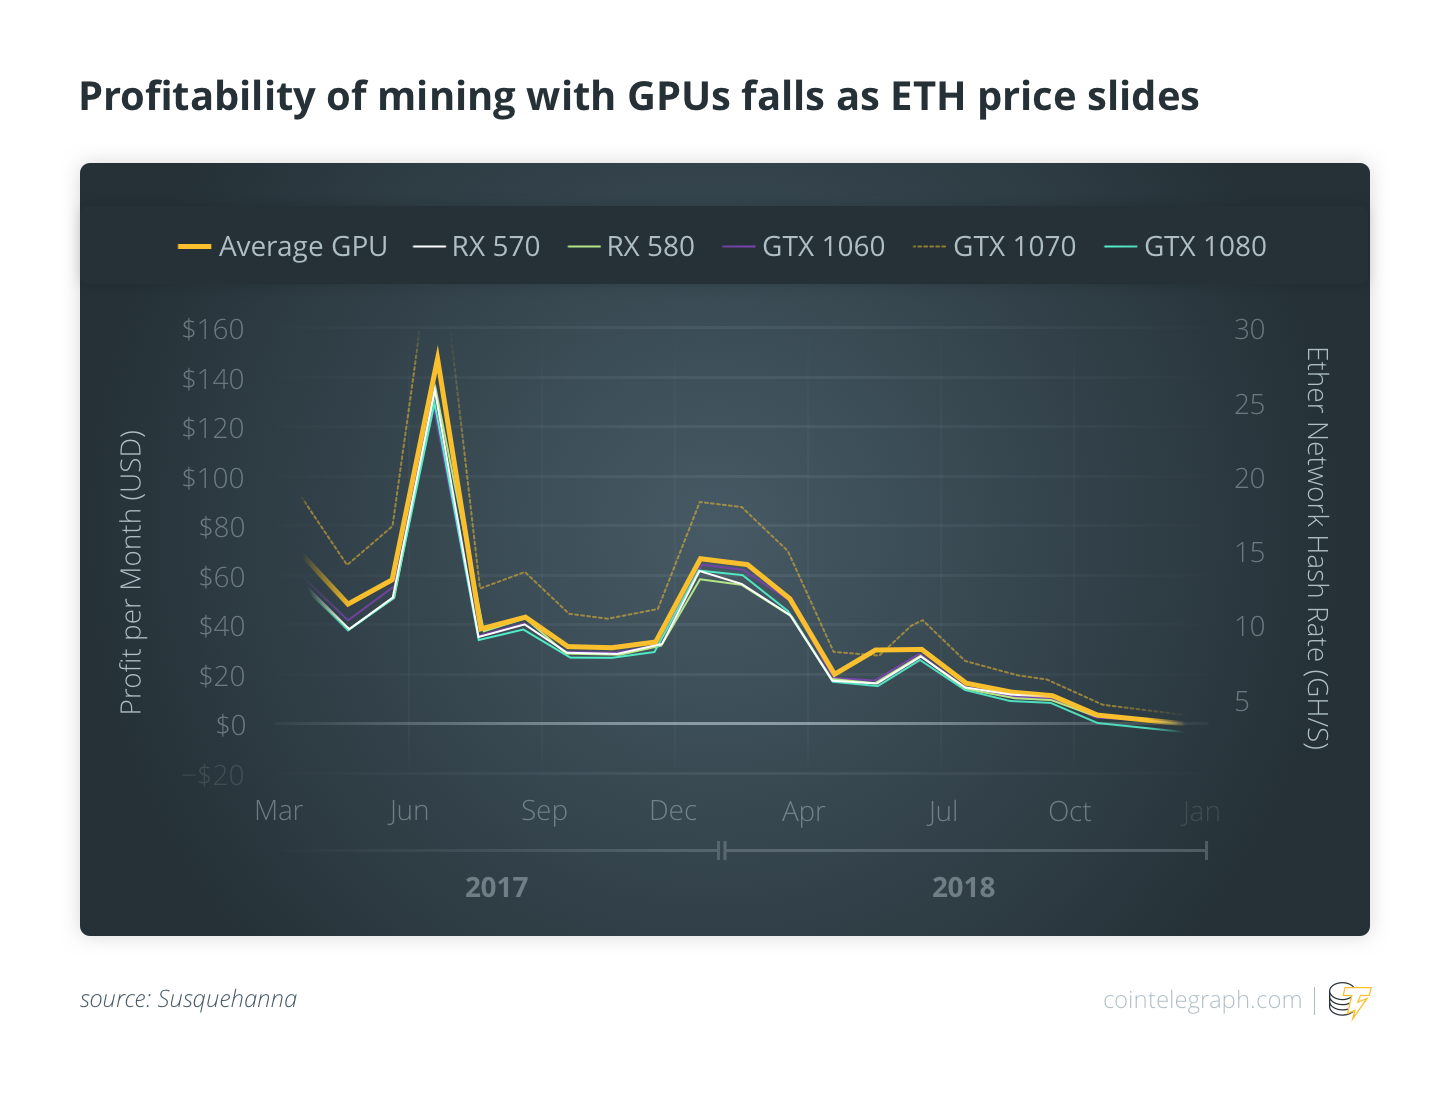 Profitability of mining with GPUs falls as ETH price slides